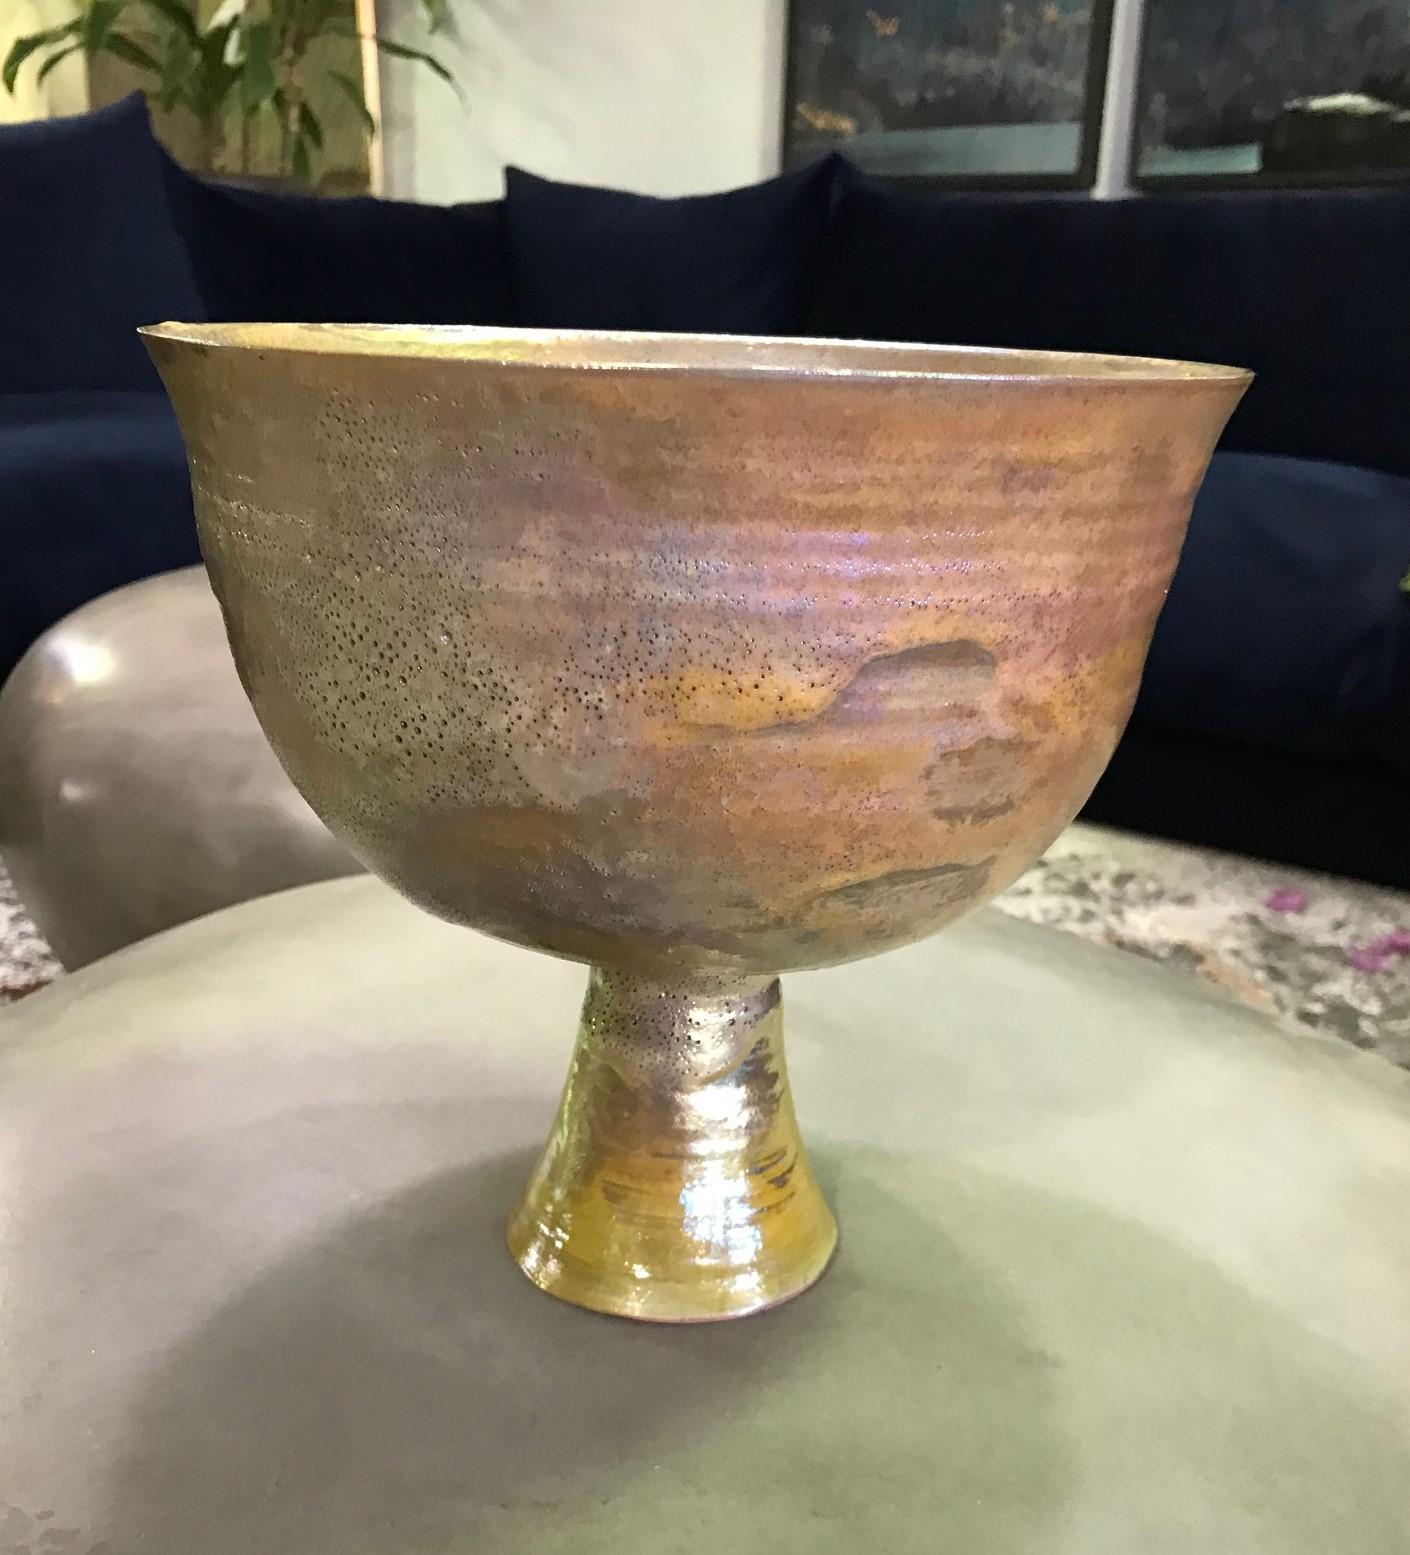 A wonderful piece by famed American ceramist Beatrice Wood featuring her highly coveted Iridescent luster glaze. A wonderful design rising on a circular base with a rich golden glaze that shimmers in the light sumptuously applied by Beatrice.